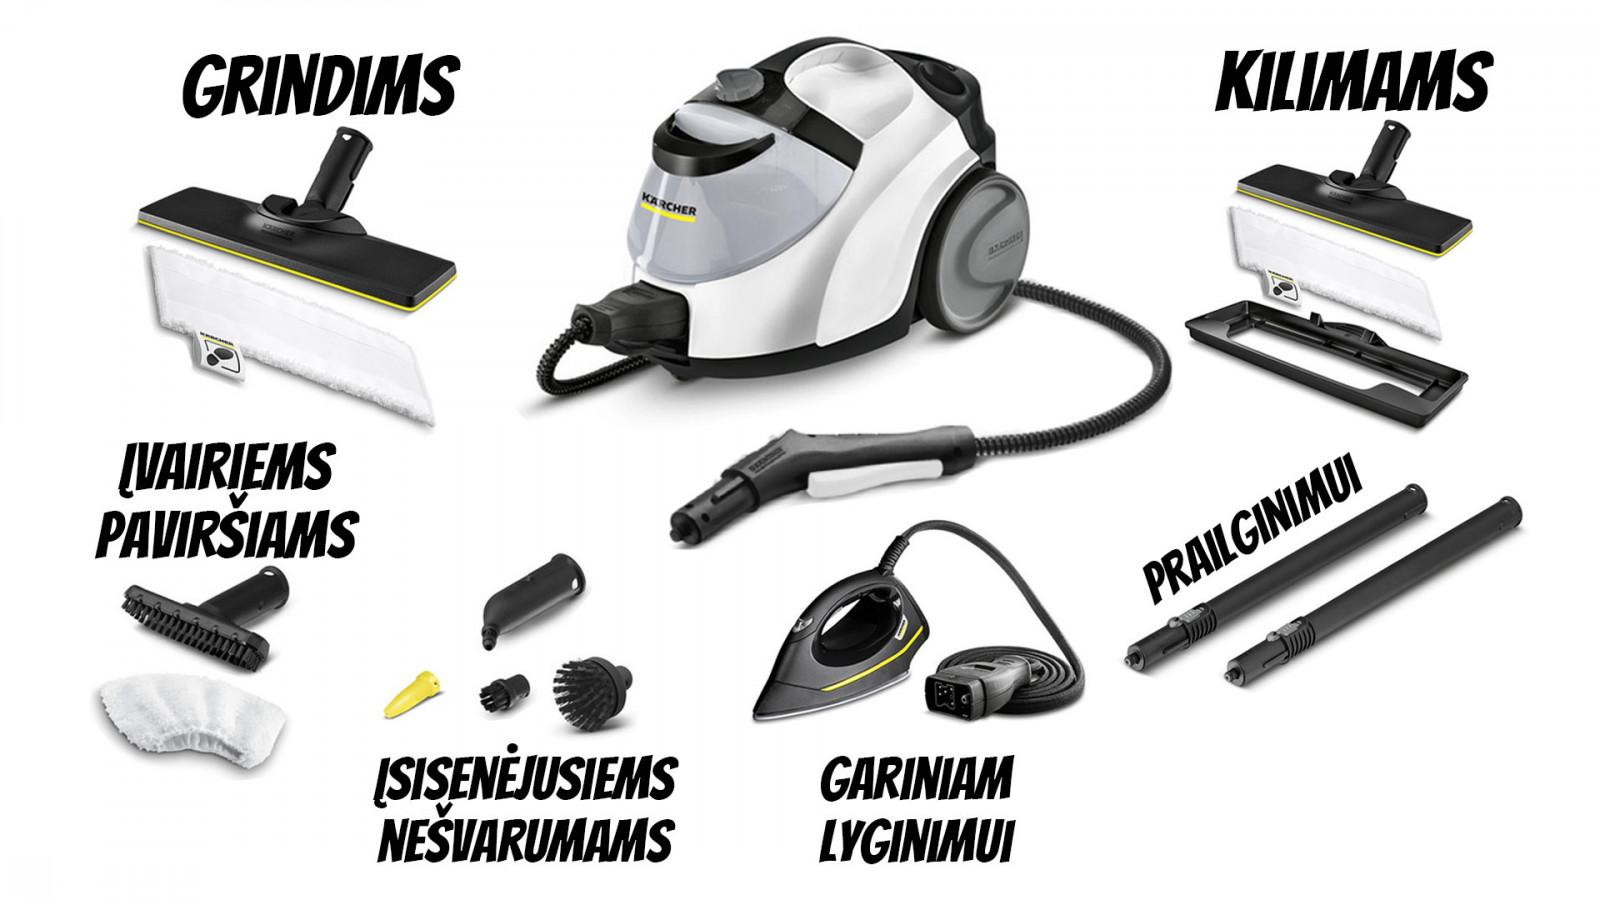 Steam cleaner Karcher SC 5 Easyfix, Carpet cleaners for rent